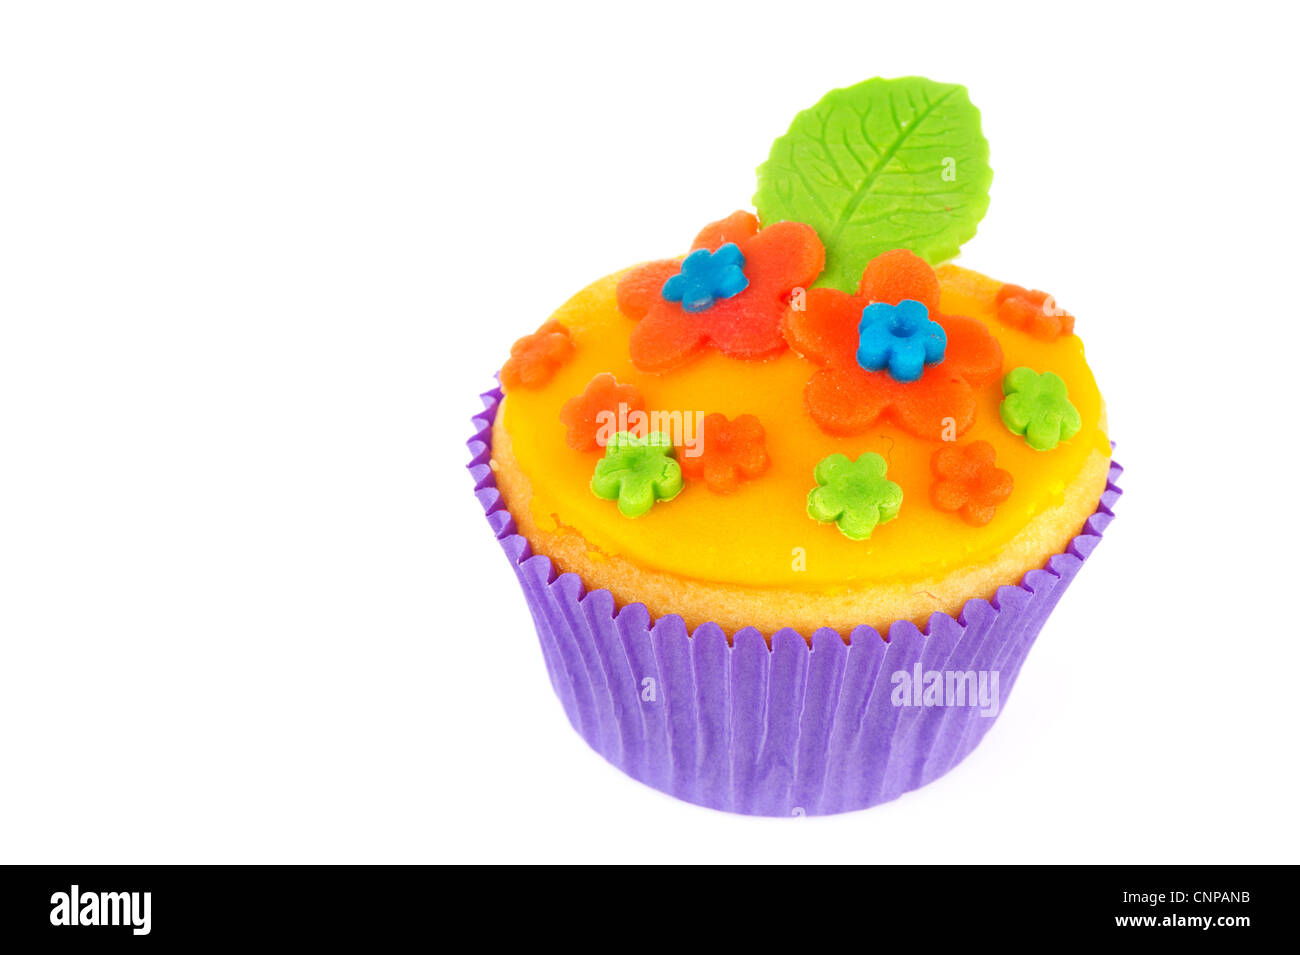 Colorful cupcake with flowers and leave Stock Photo